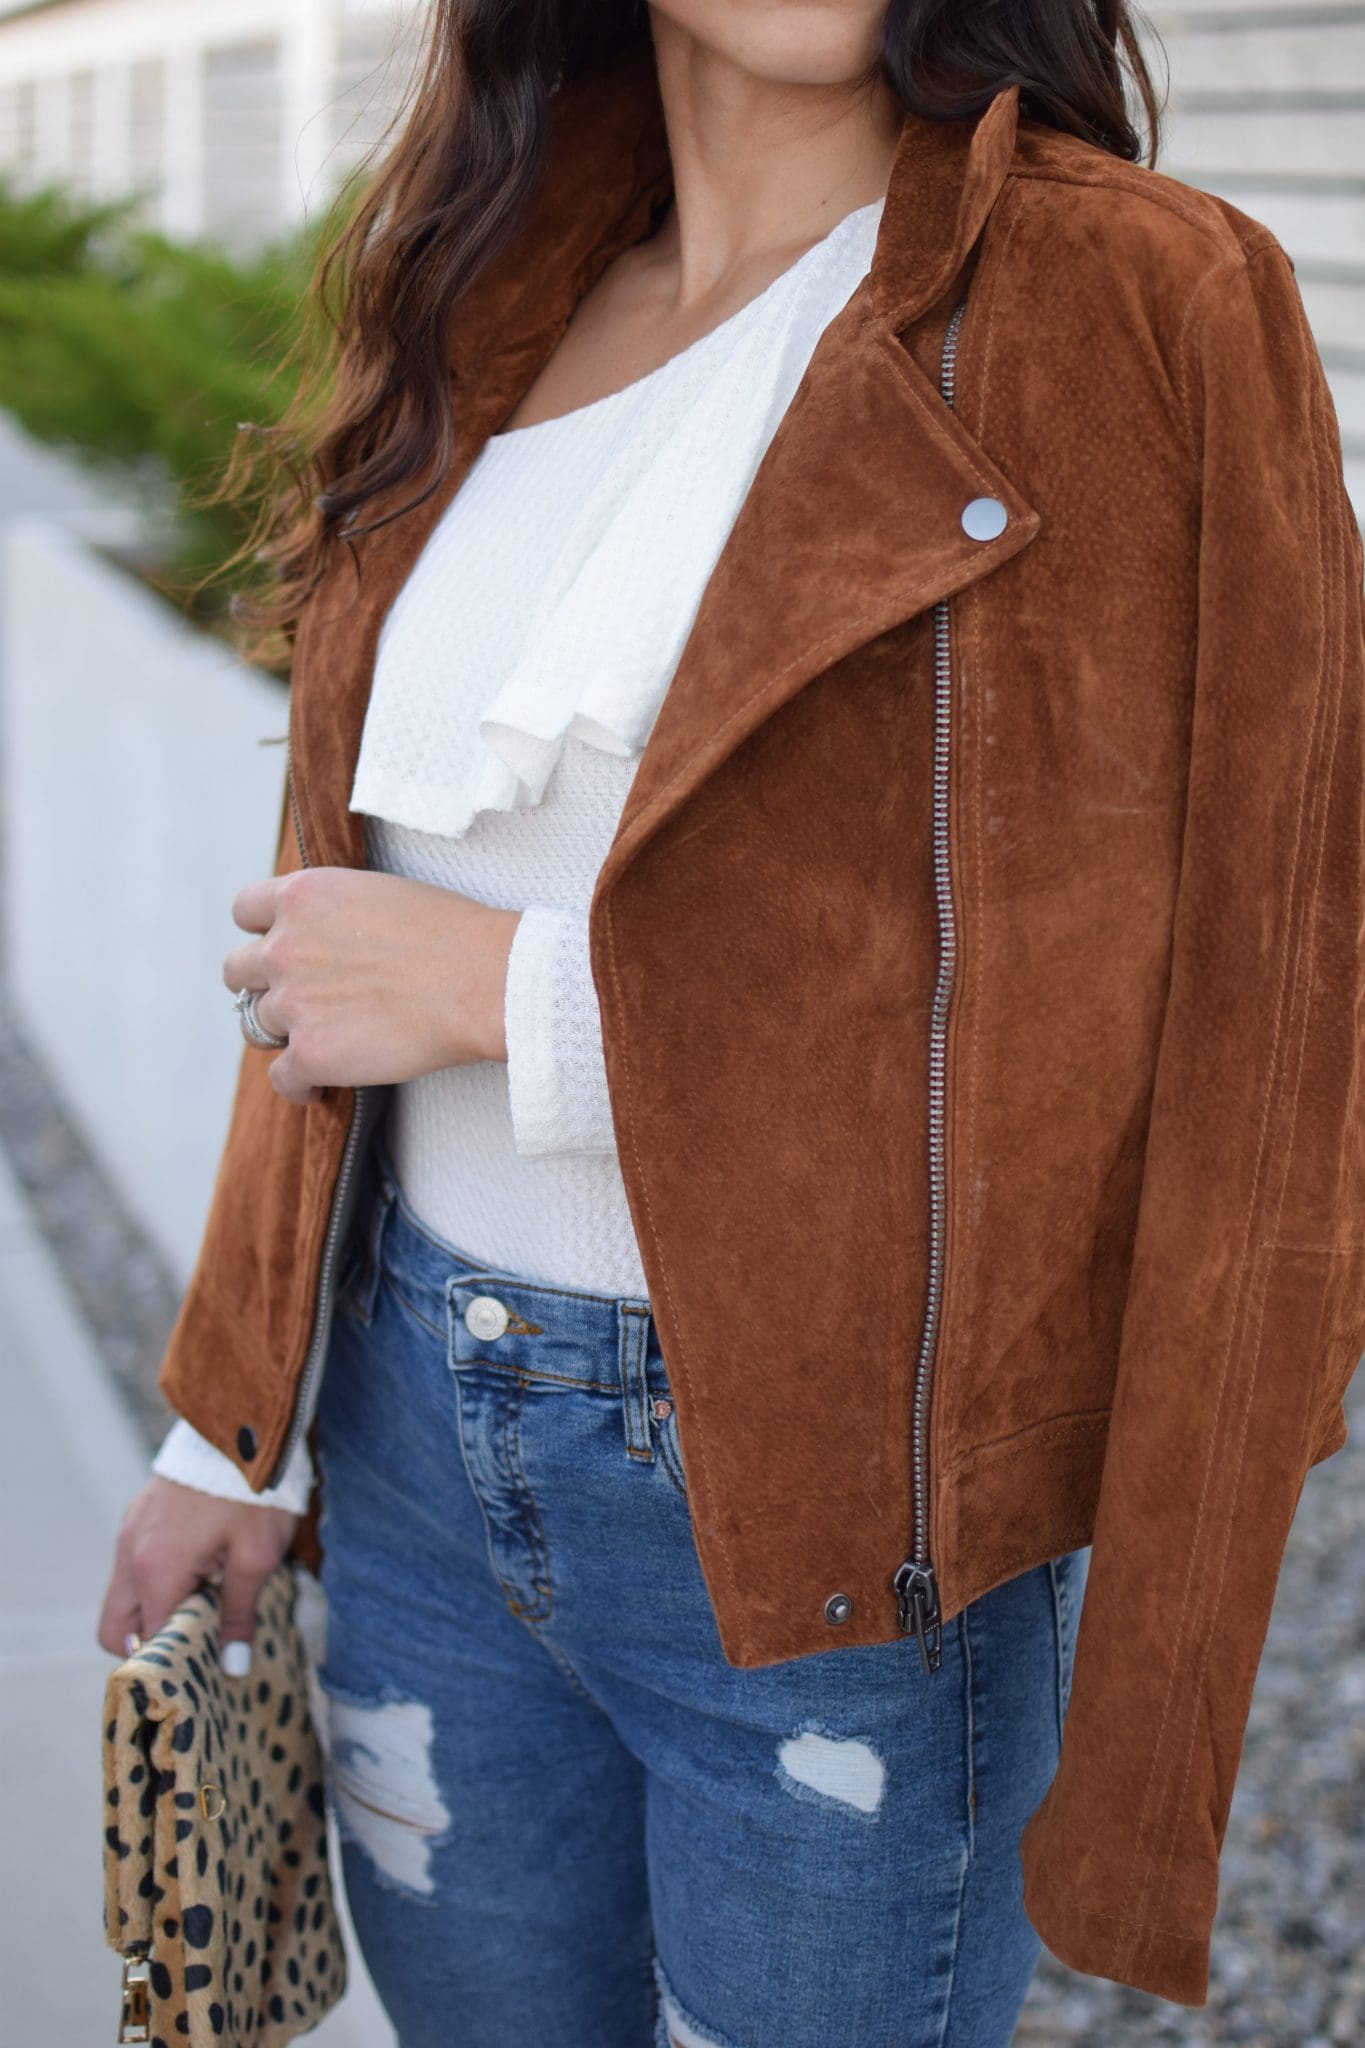 Top 5 Jackets for Fall (and a few dupes)! | Fit Mommy In Heels